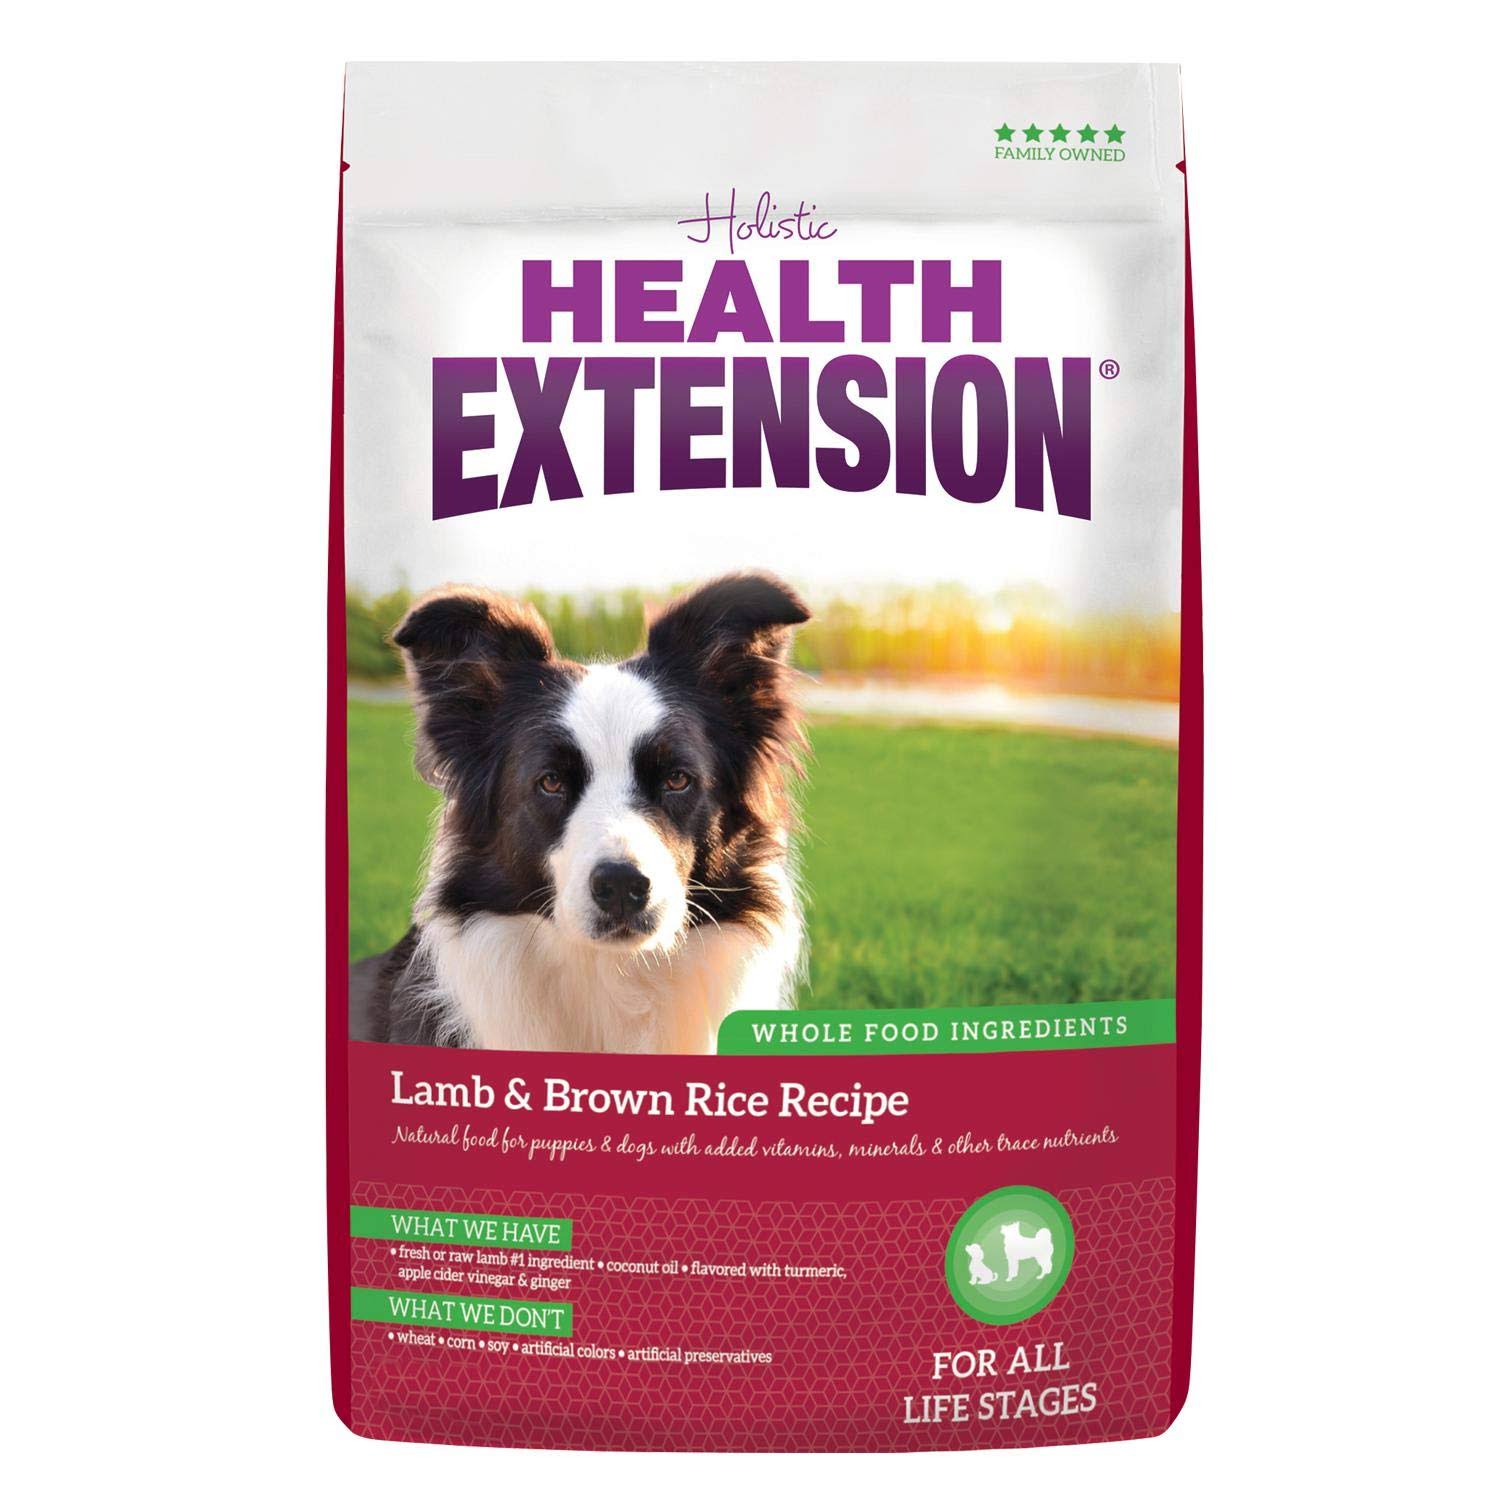 Holistic Health Extension Dog Food - Lamb and Brown Rice, 15lb